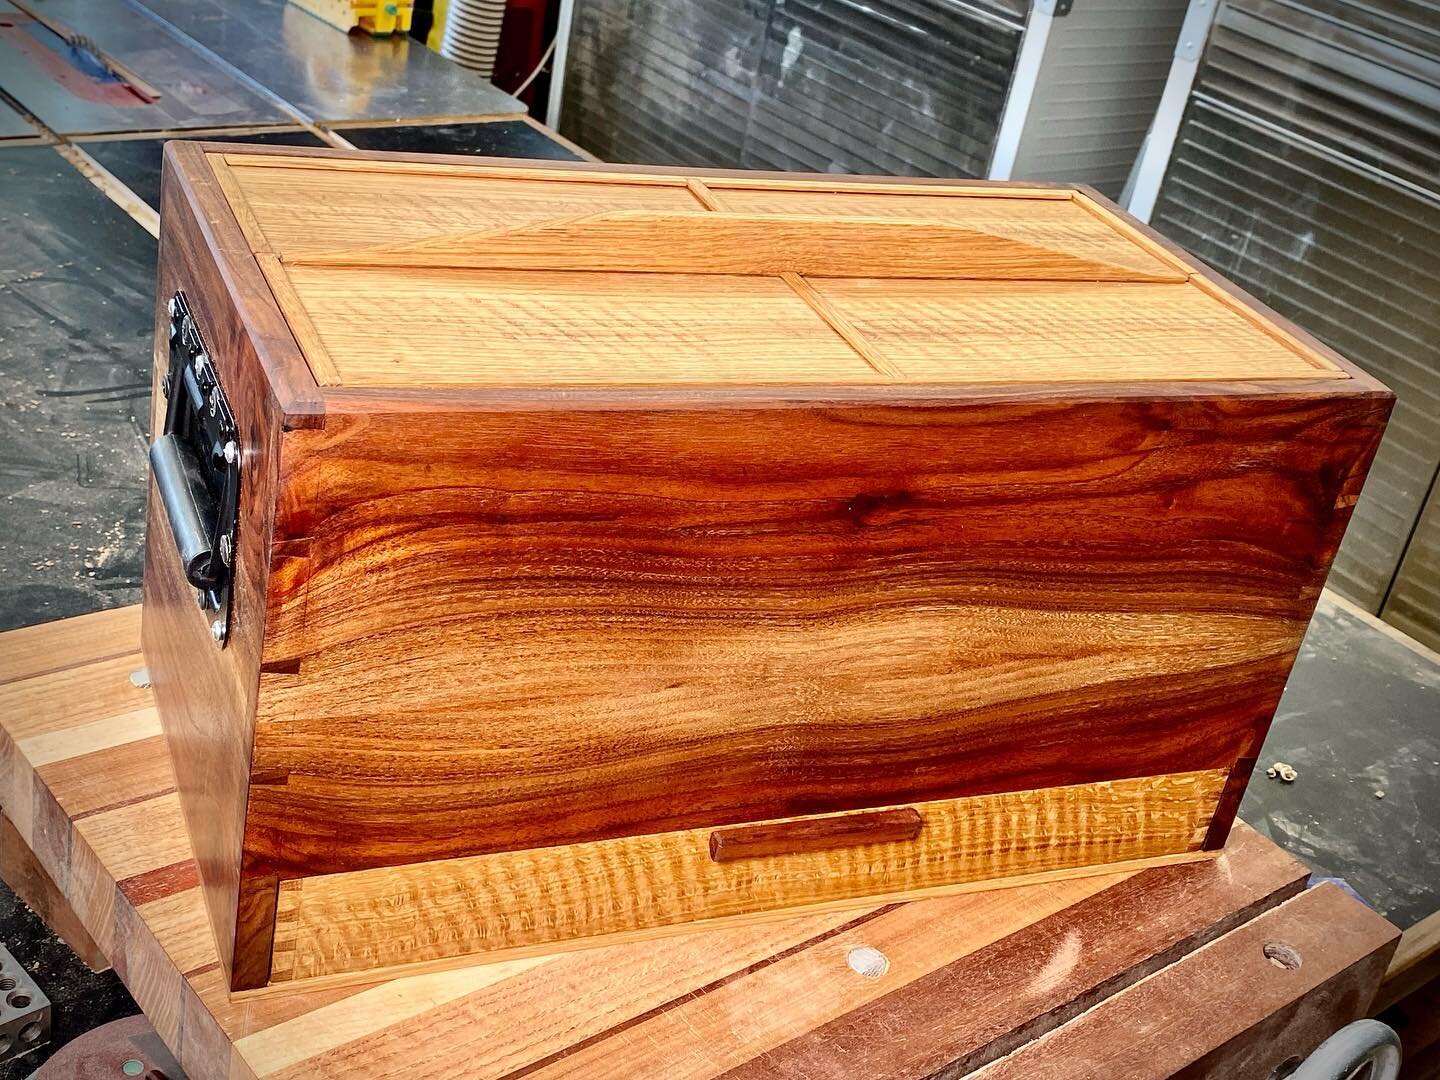 Sneak peek into the latest project - a portable toolbox coming in at about 20&rdquo; x 10.5&rdquo; x 10.5&rdquo;. Wrapped bookmarked walnut sides with quartersawb white oak bottom drawer and top - the top lifts out to reveal a 2&rdquo; tall tray with